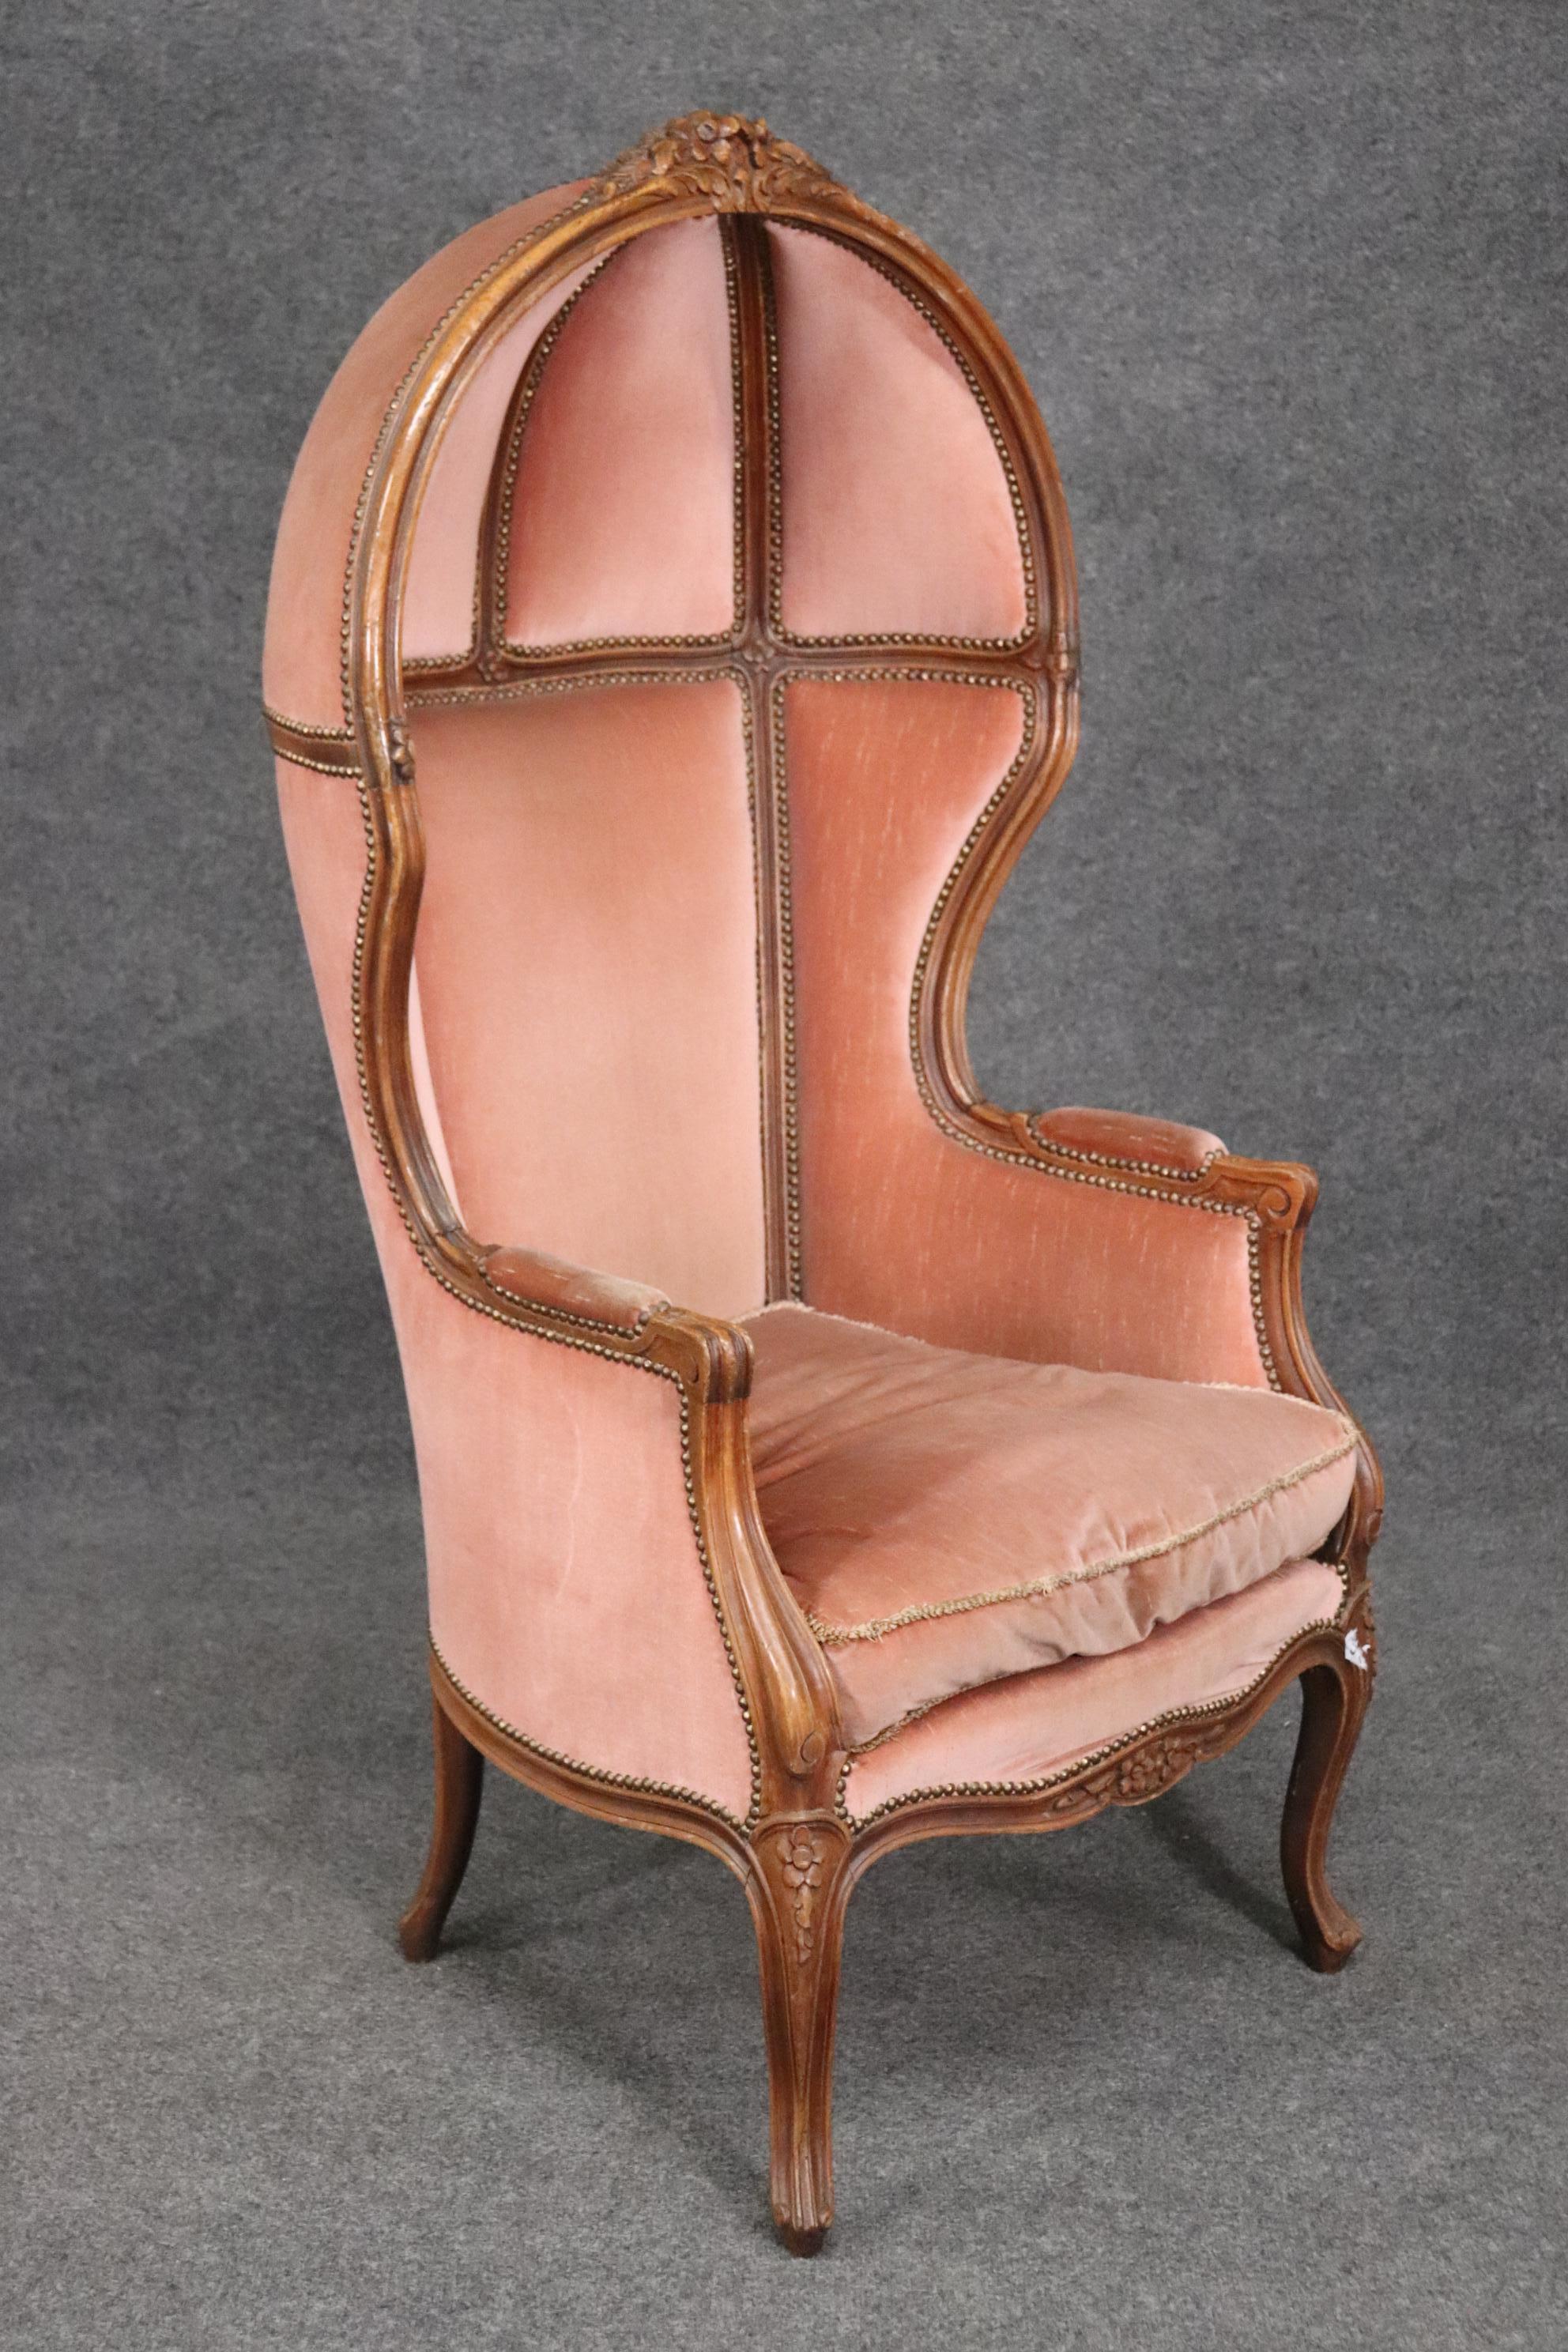 This is a fantastic carved walnut French porter chair. The carving is masterfully done. The upholstery is in good usable condition. The chair is also comfortbale. The chair measures 27 deep x 30 wide x 55 tall and the seat height is 19 inches. Dates